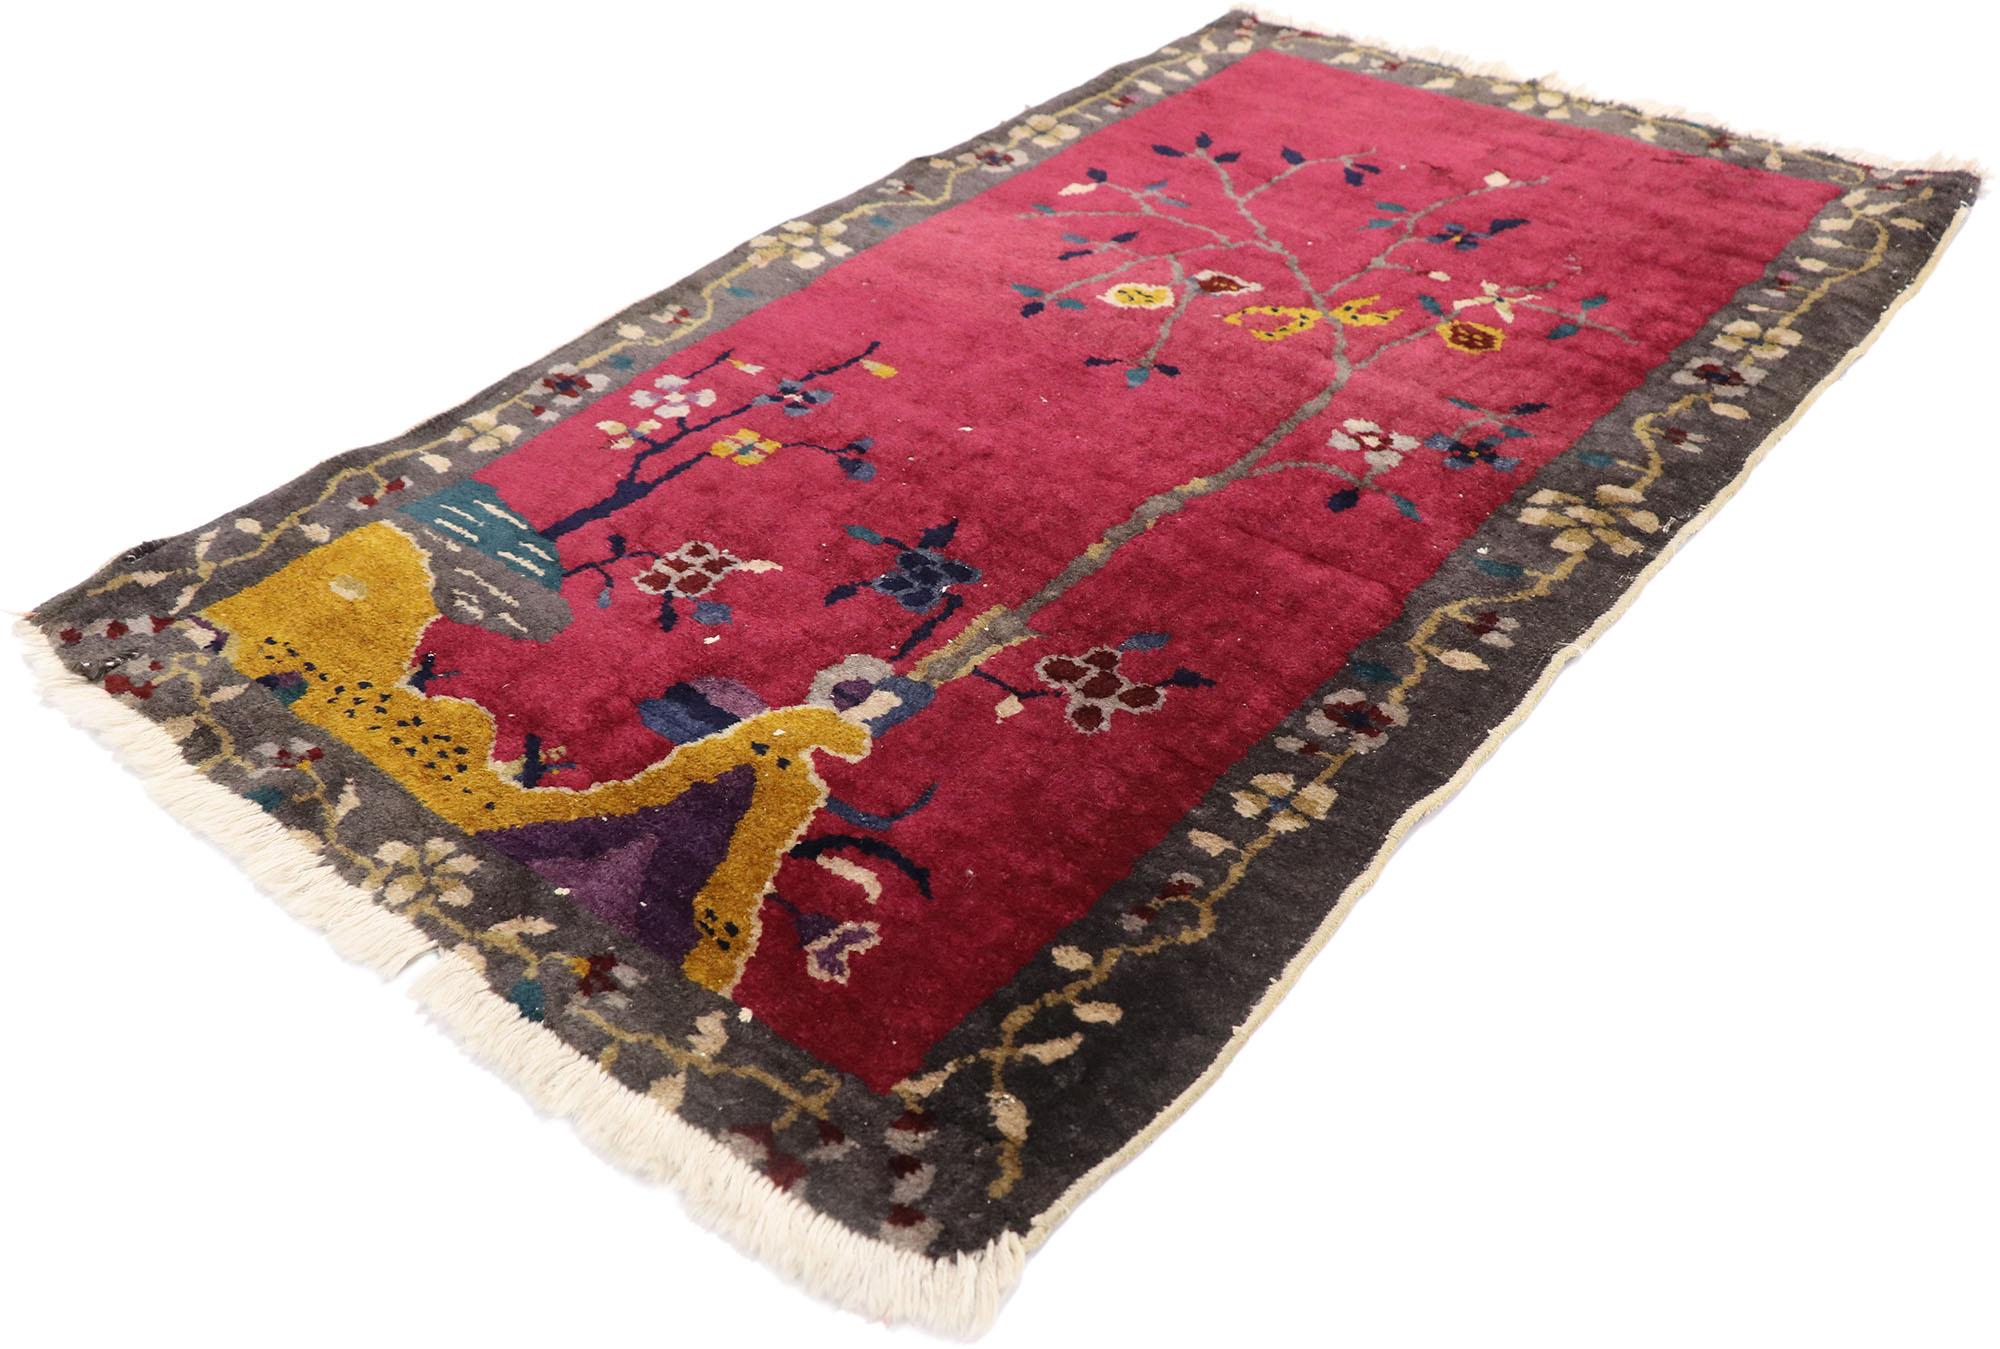 77969 Vintage Chinese Art Deco Rug, 02'02 x 03'09. This hand knotted wool vintage Chinese Art Deco rug exudes a captivating allure, epitomizing the opulent aesthetic of maximalist style with its indulgent textures and sensual decadence. Through its